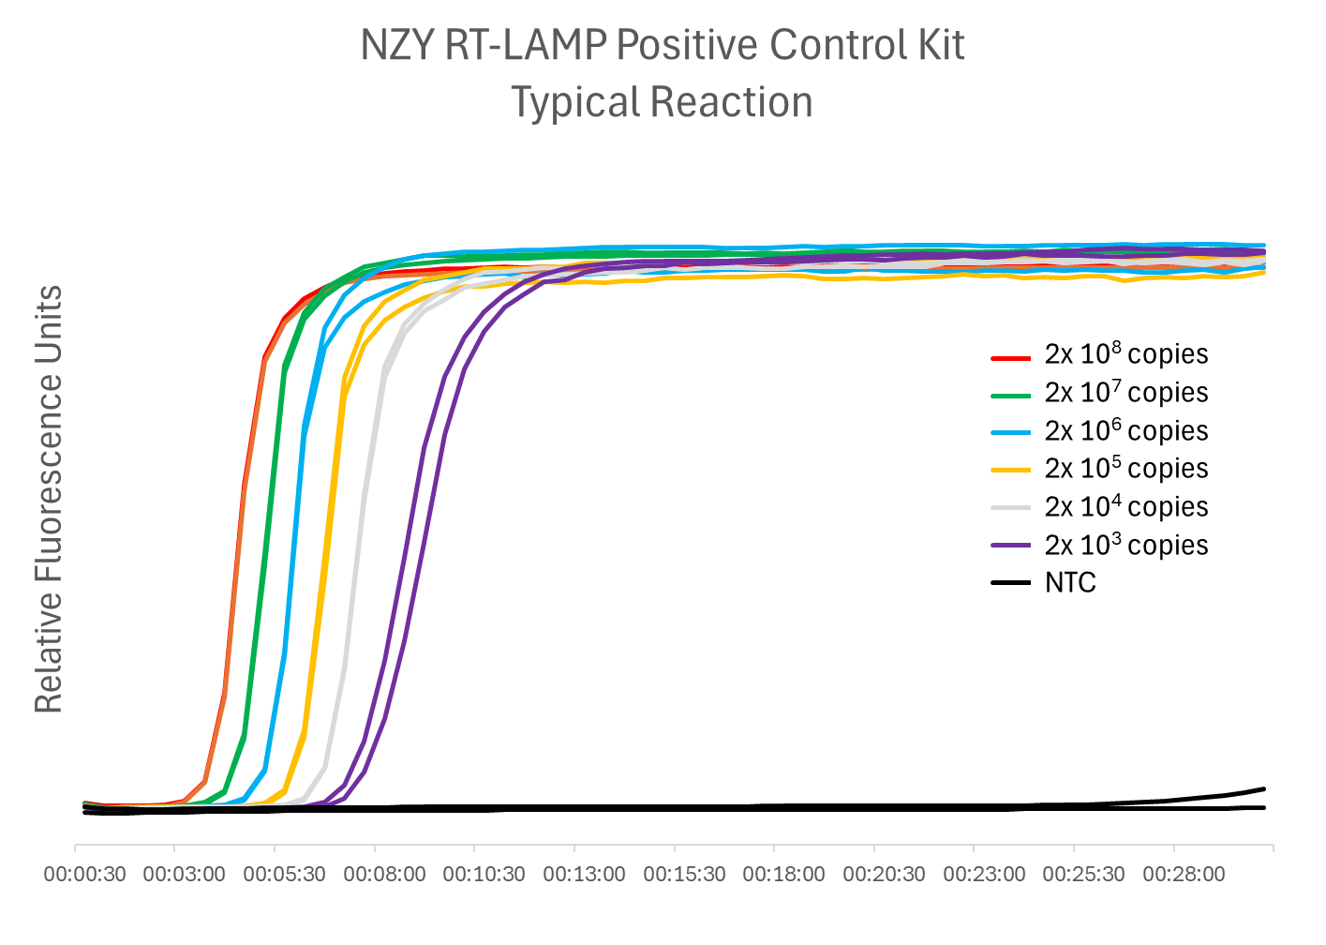 NZY RT-Lamp Positive Control Kit Typical Reaction